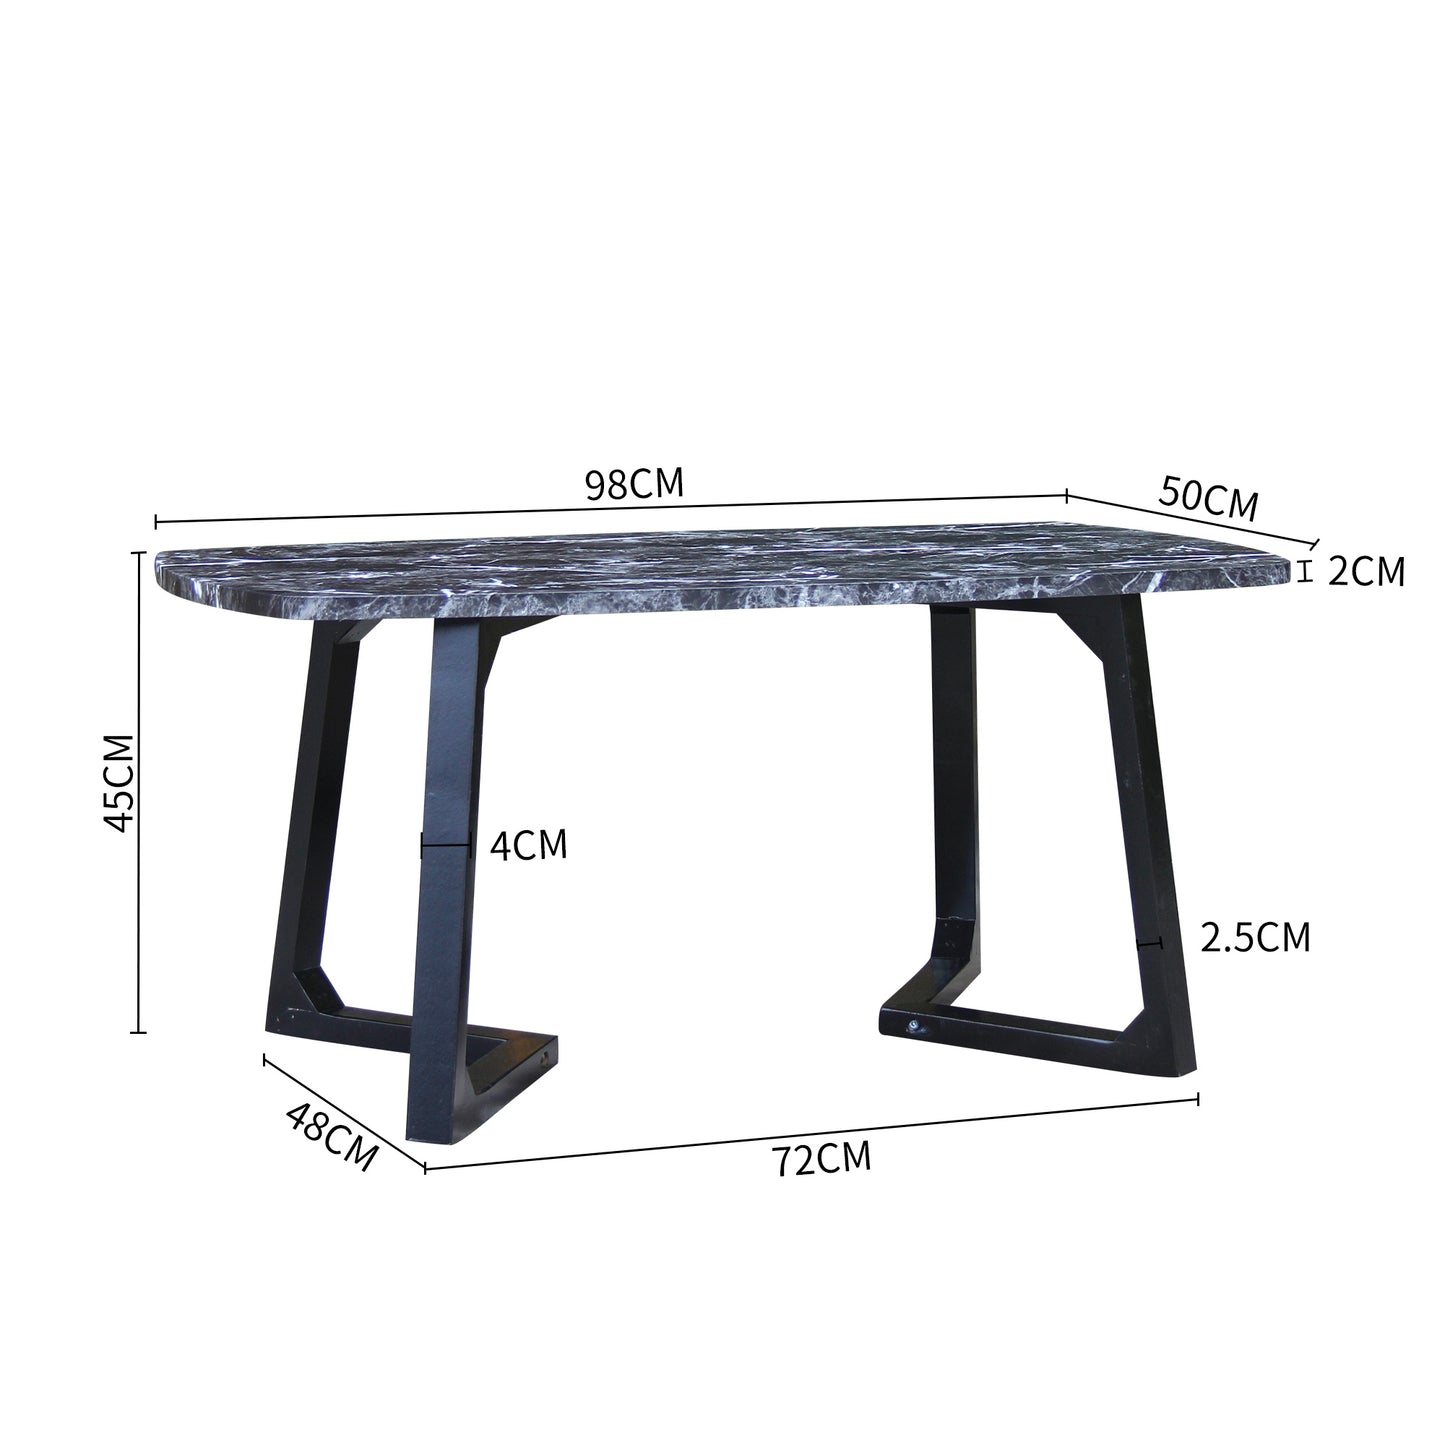 CHOTTO - Kika Rounded Rectangle Coffee Table - Black Marble Color